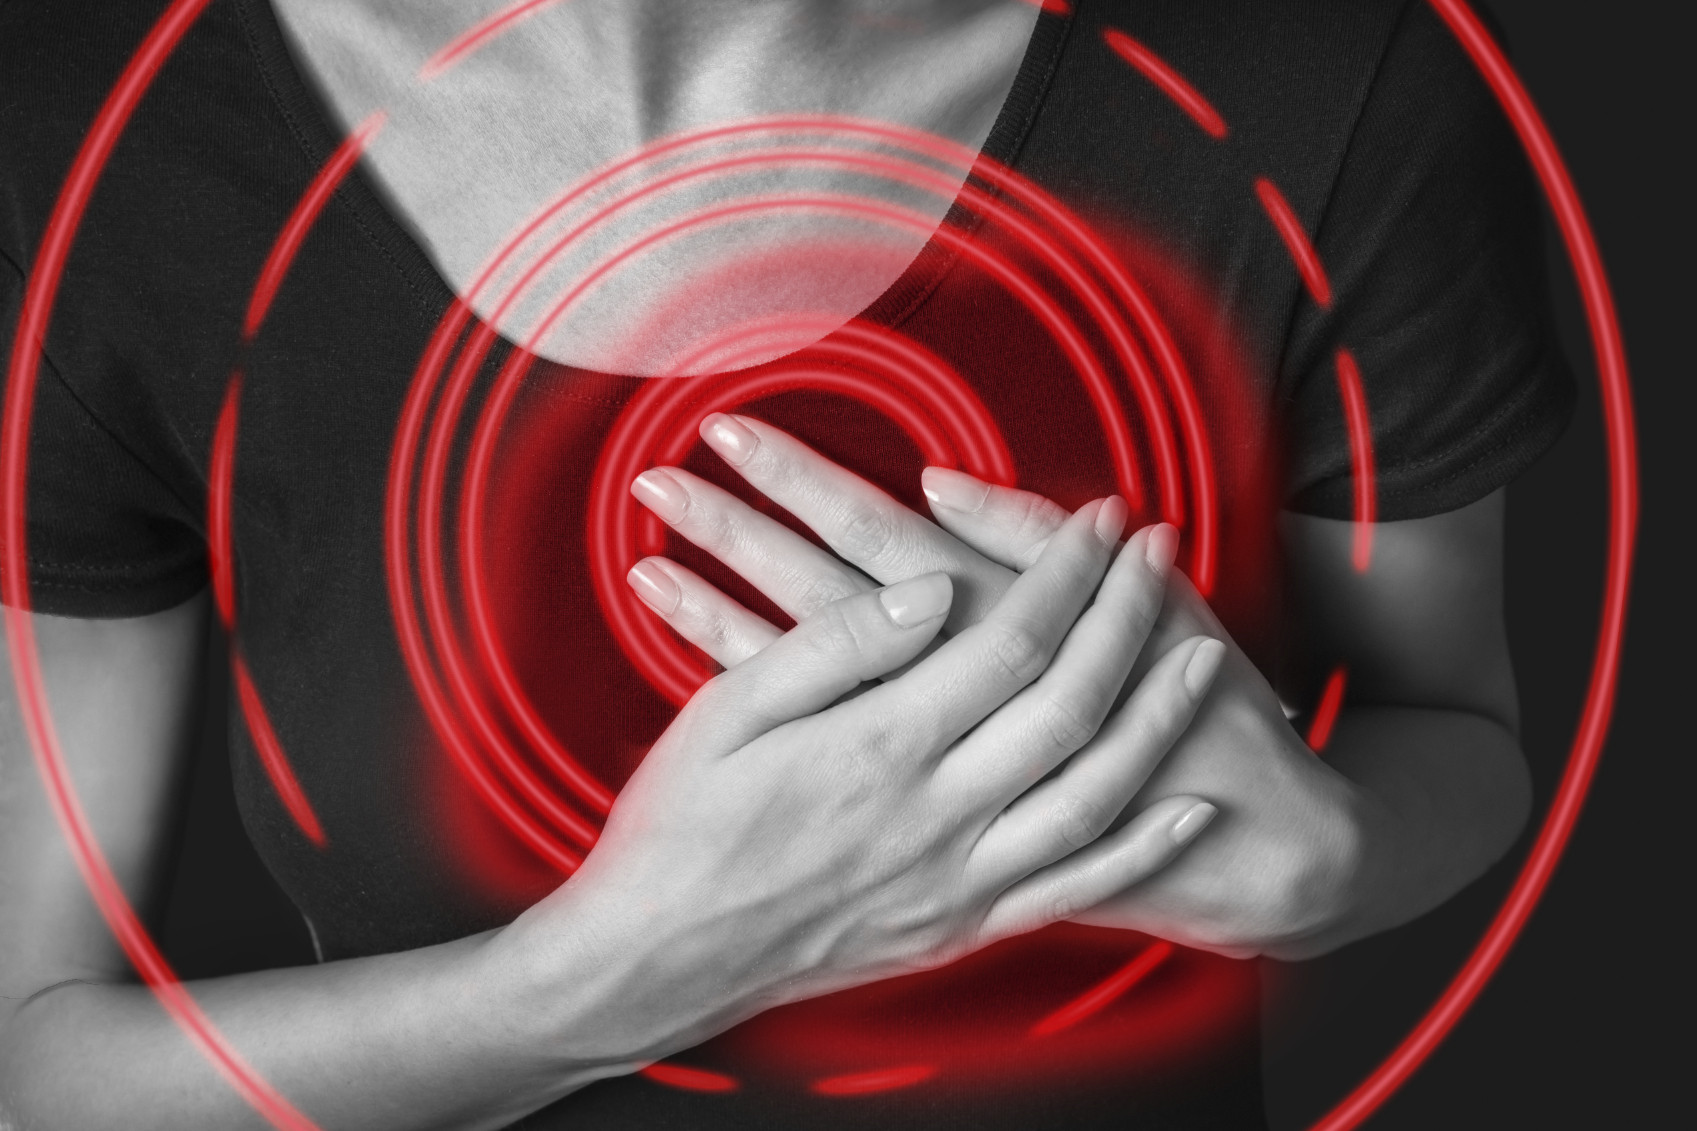 Gain a comprehensive understanding of heart attacks, including their causes, symptoms, risk factors, and prevention. Explore vital information to help protect your heart health and that of your loved ones.